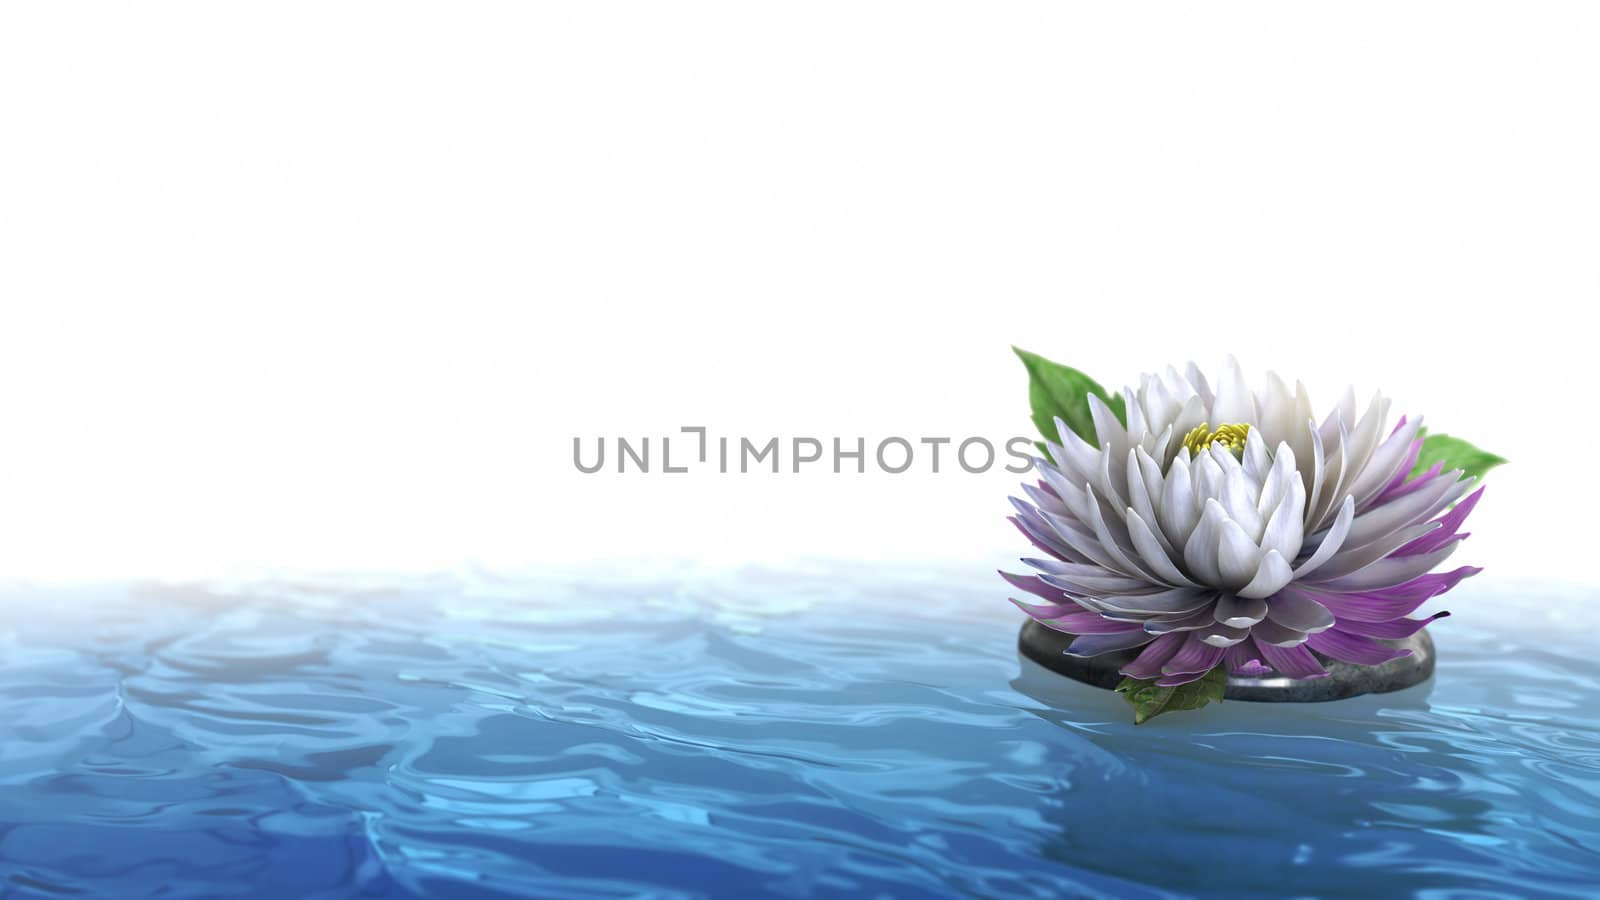 decorative holiday background flower with stone on the water by denisgo